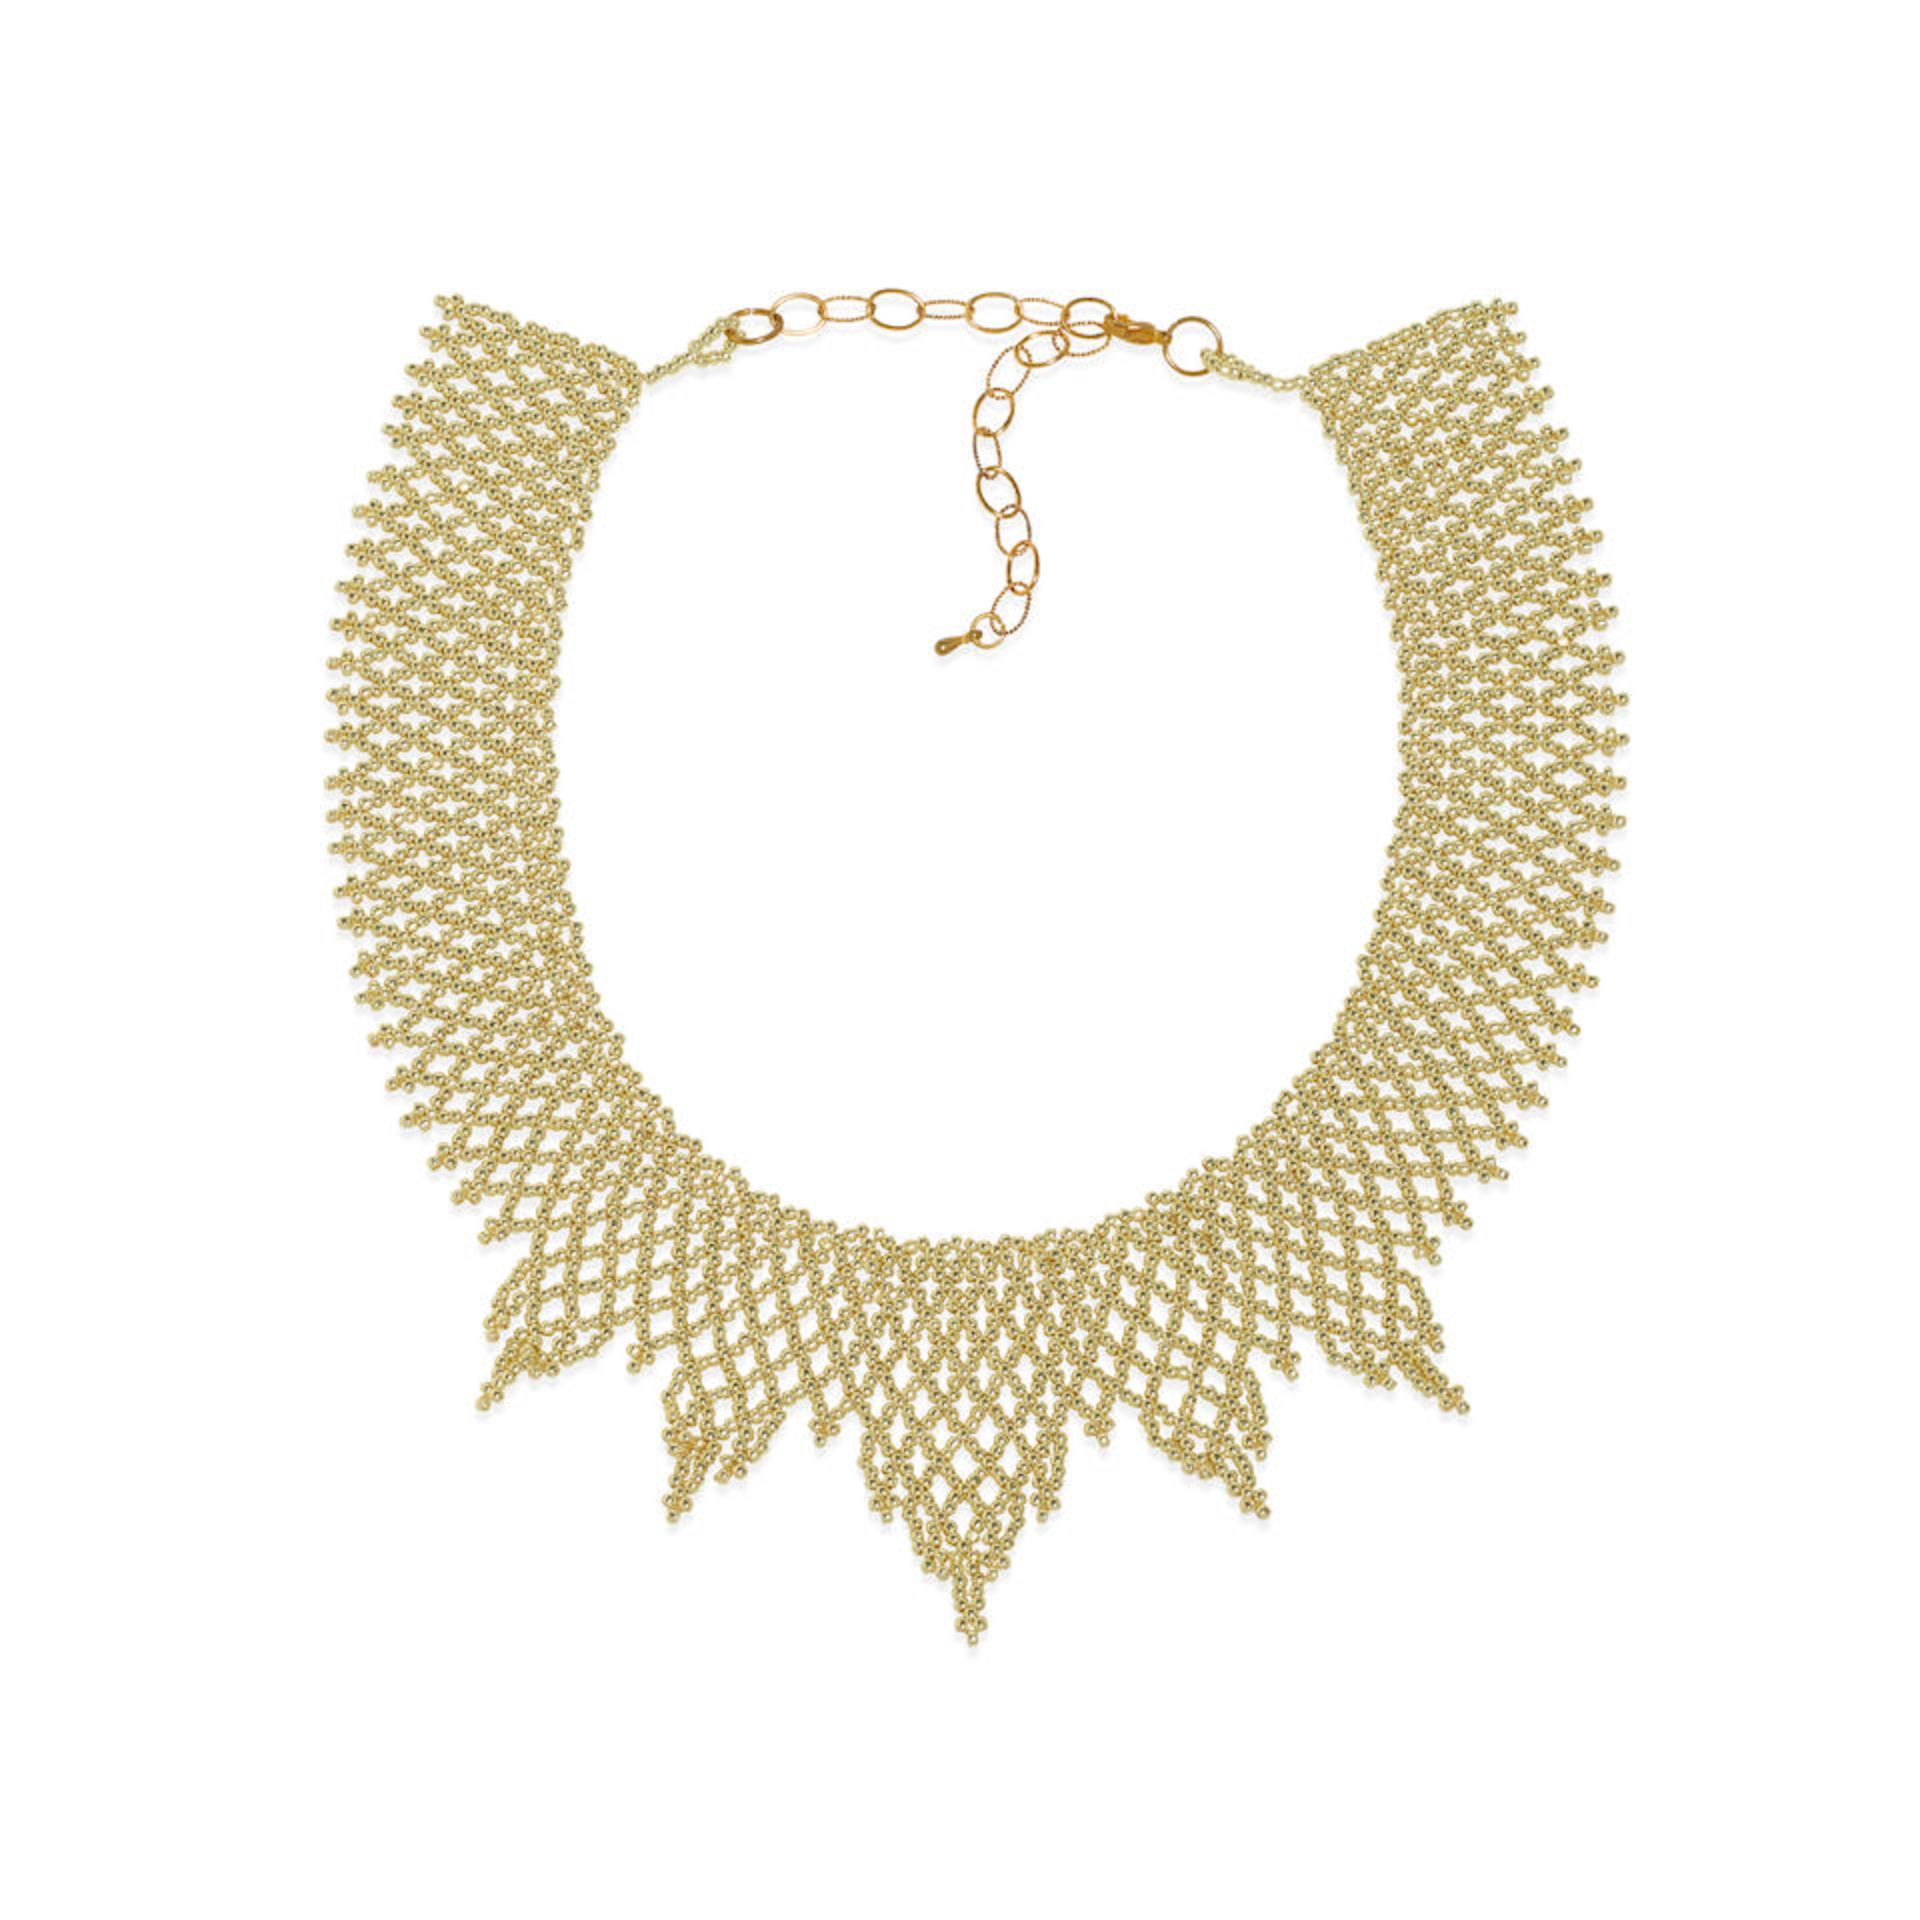 A RUTH BADER GINSBURG BEADED JUDICIAL COLLAR. A beaded collar necklace featuring round gilt glas...